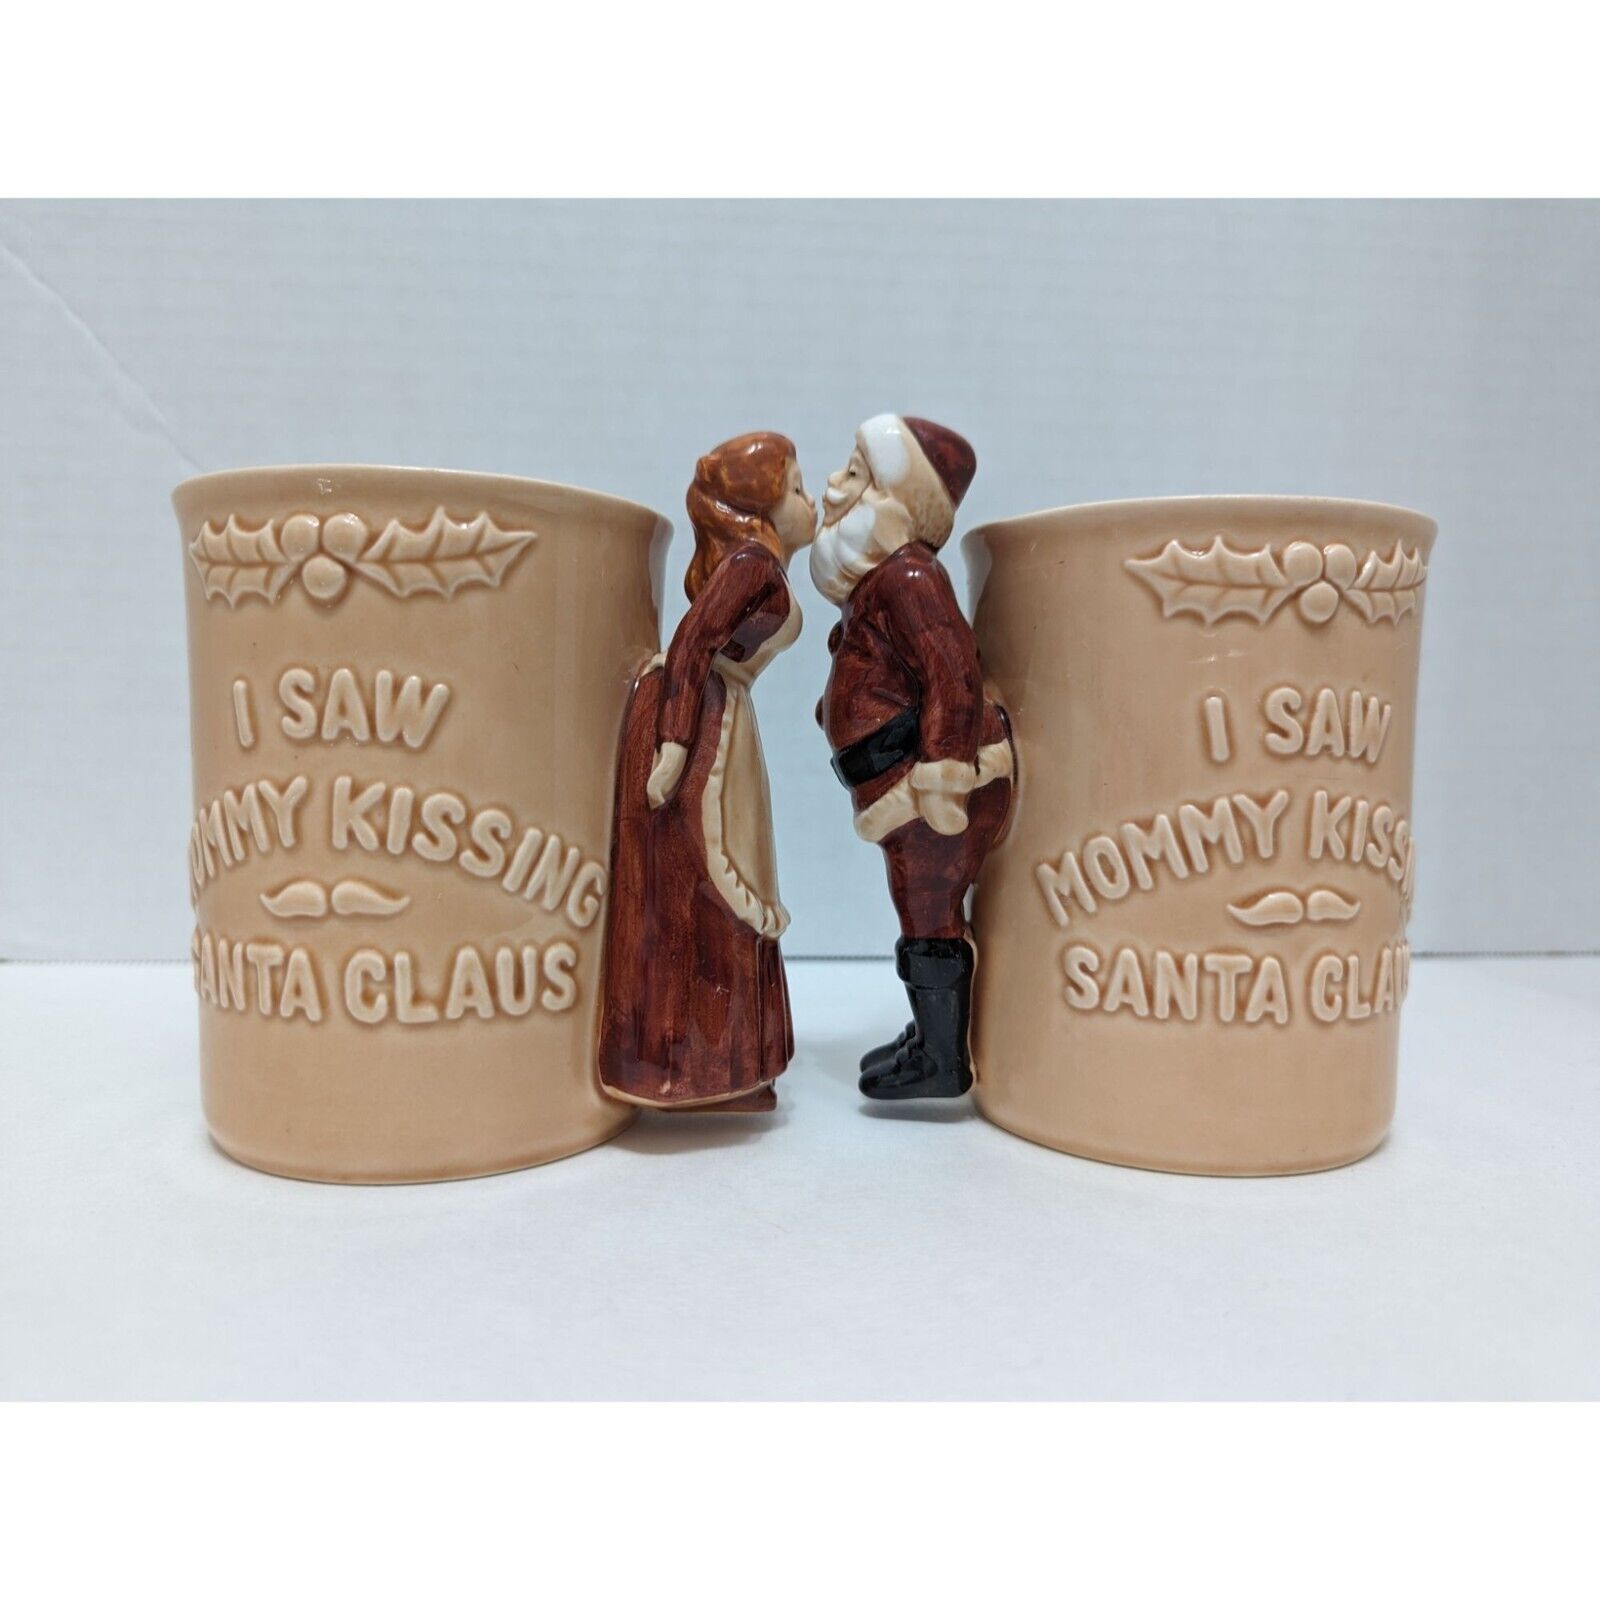 1979 Enesco I saw Mommy Kissing Santa Clause pair decor cups holiday 5 inch rare